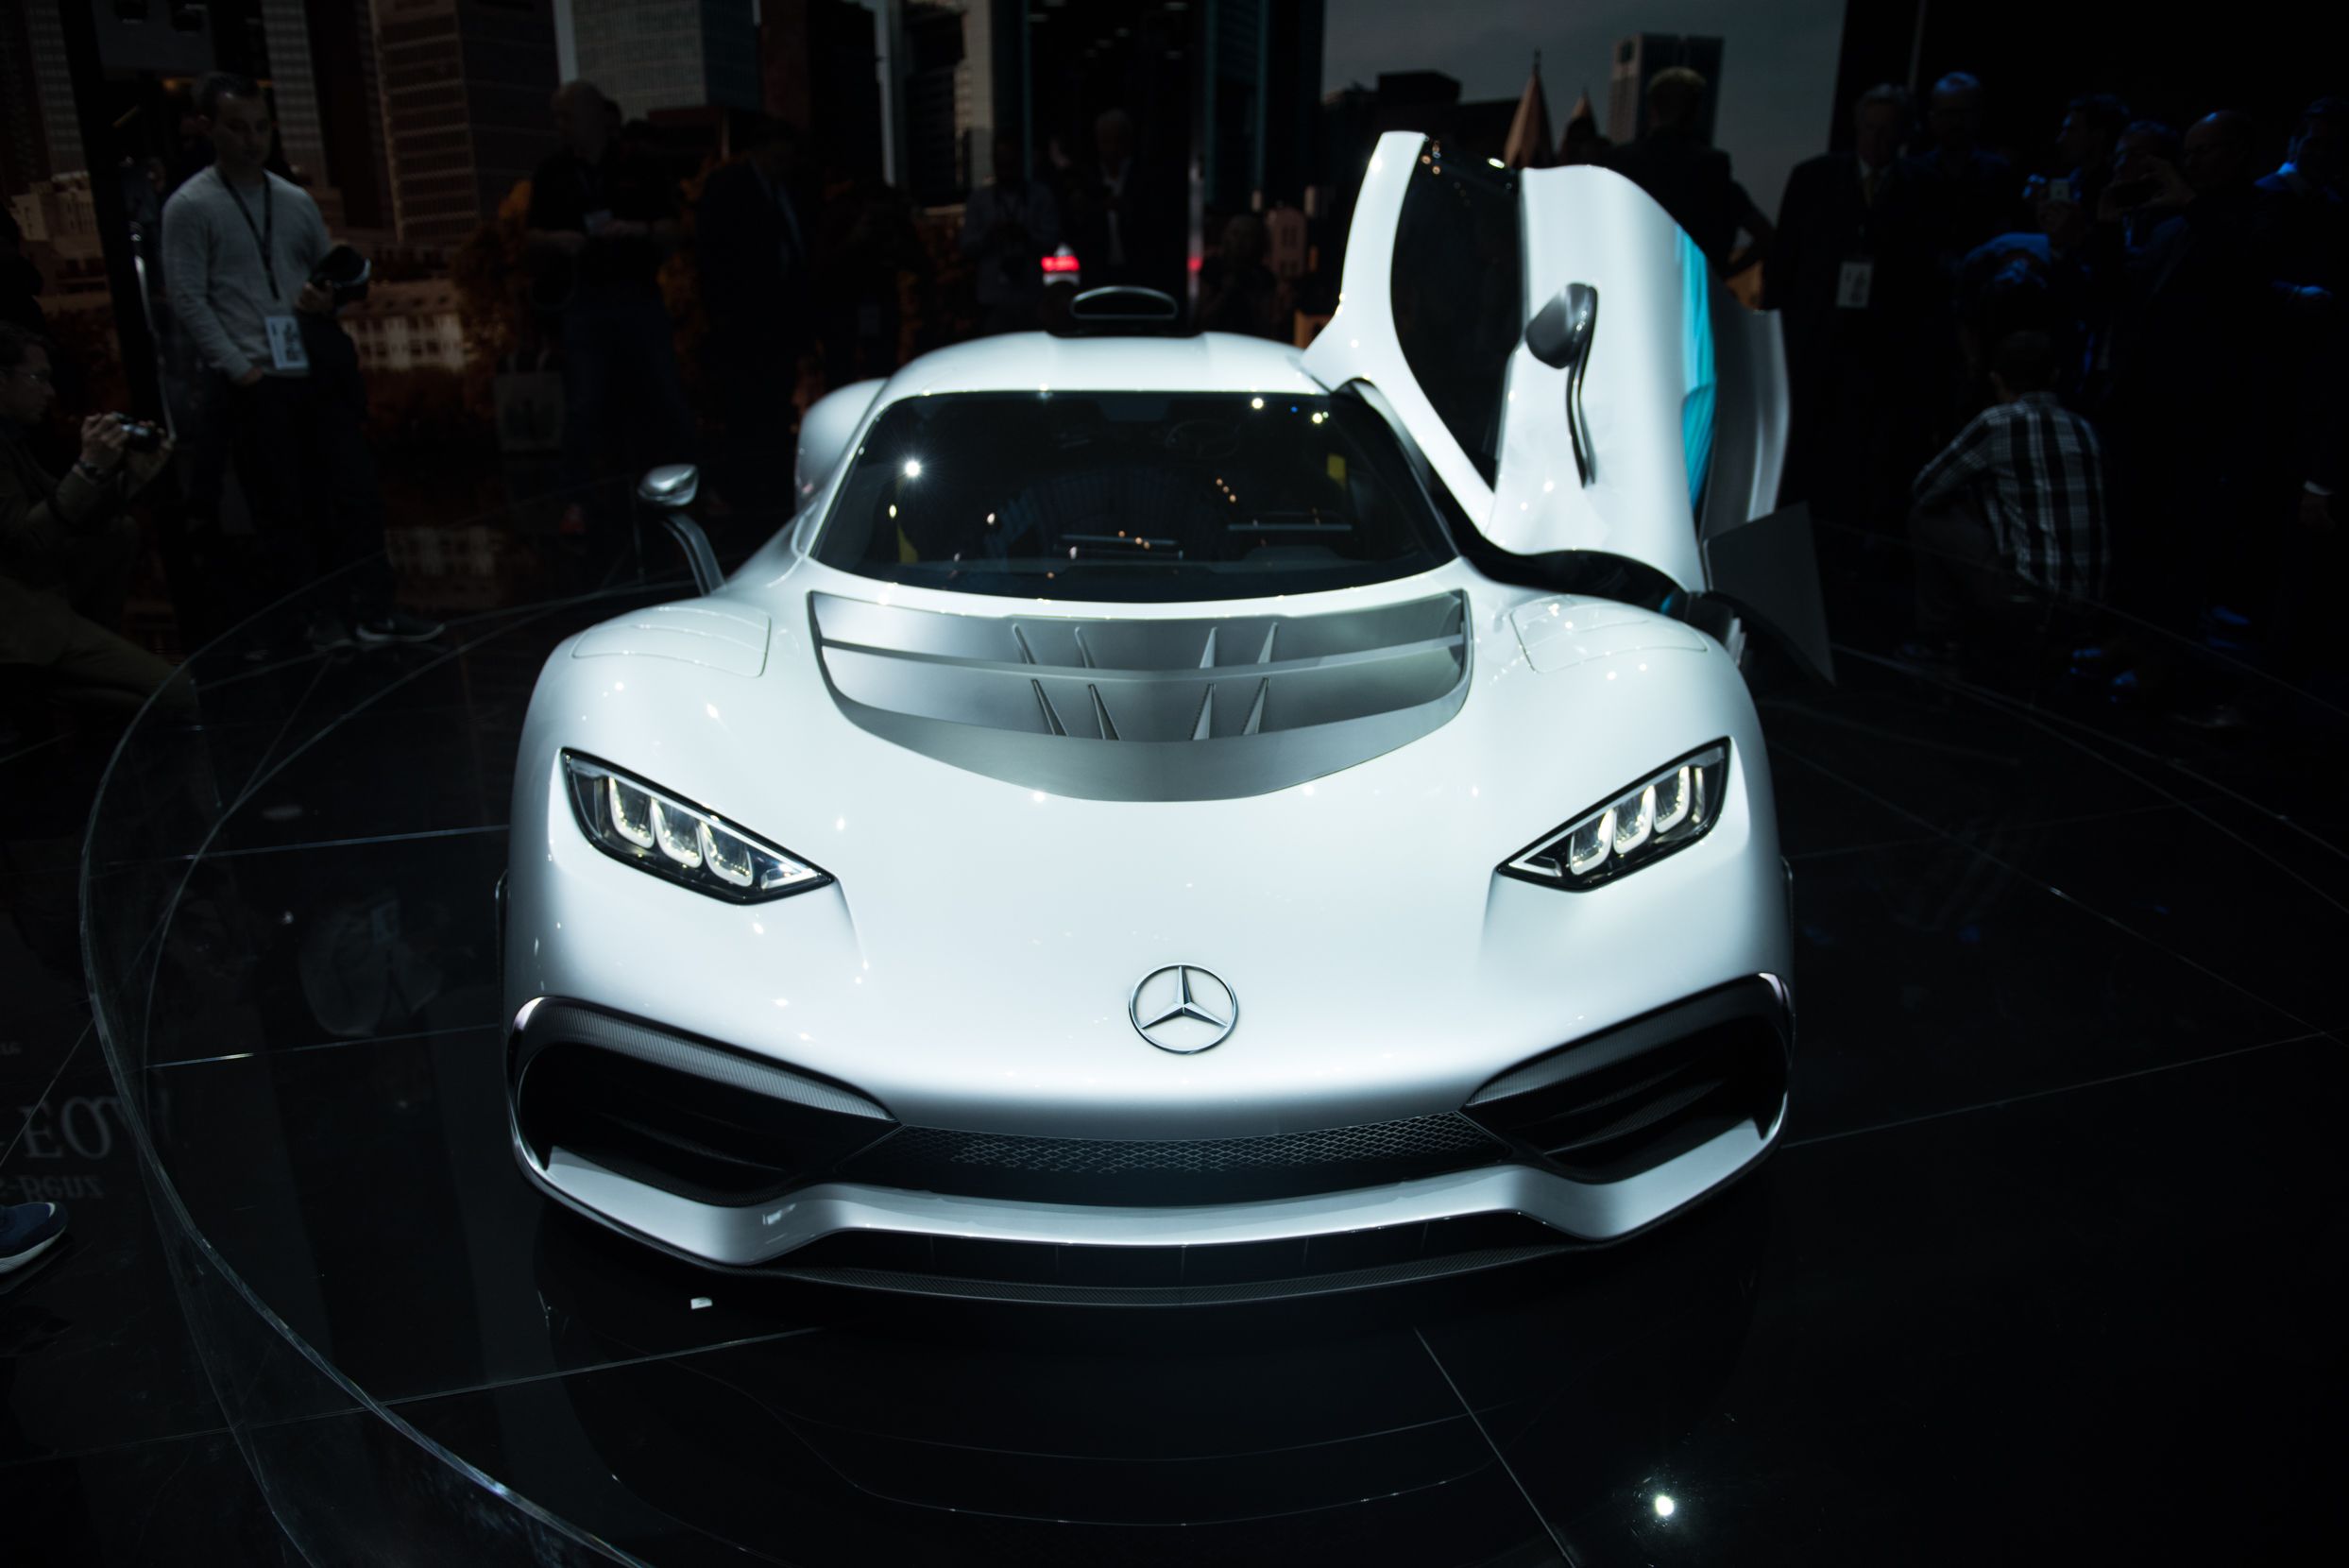 2020 Mercedes-AMG Project One